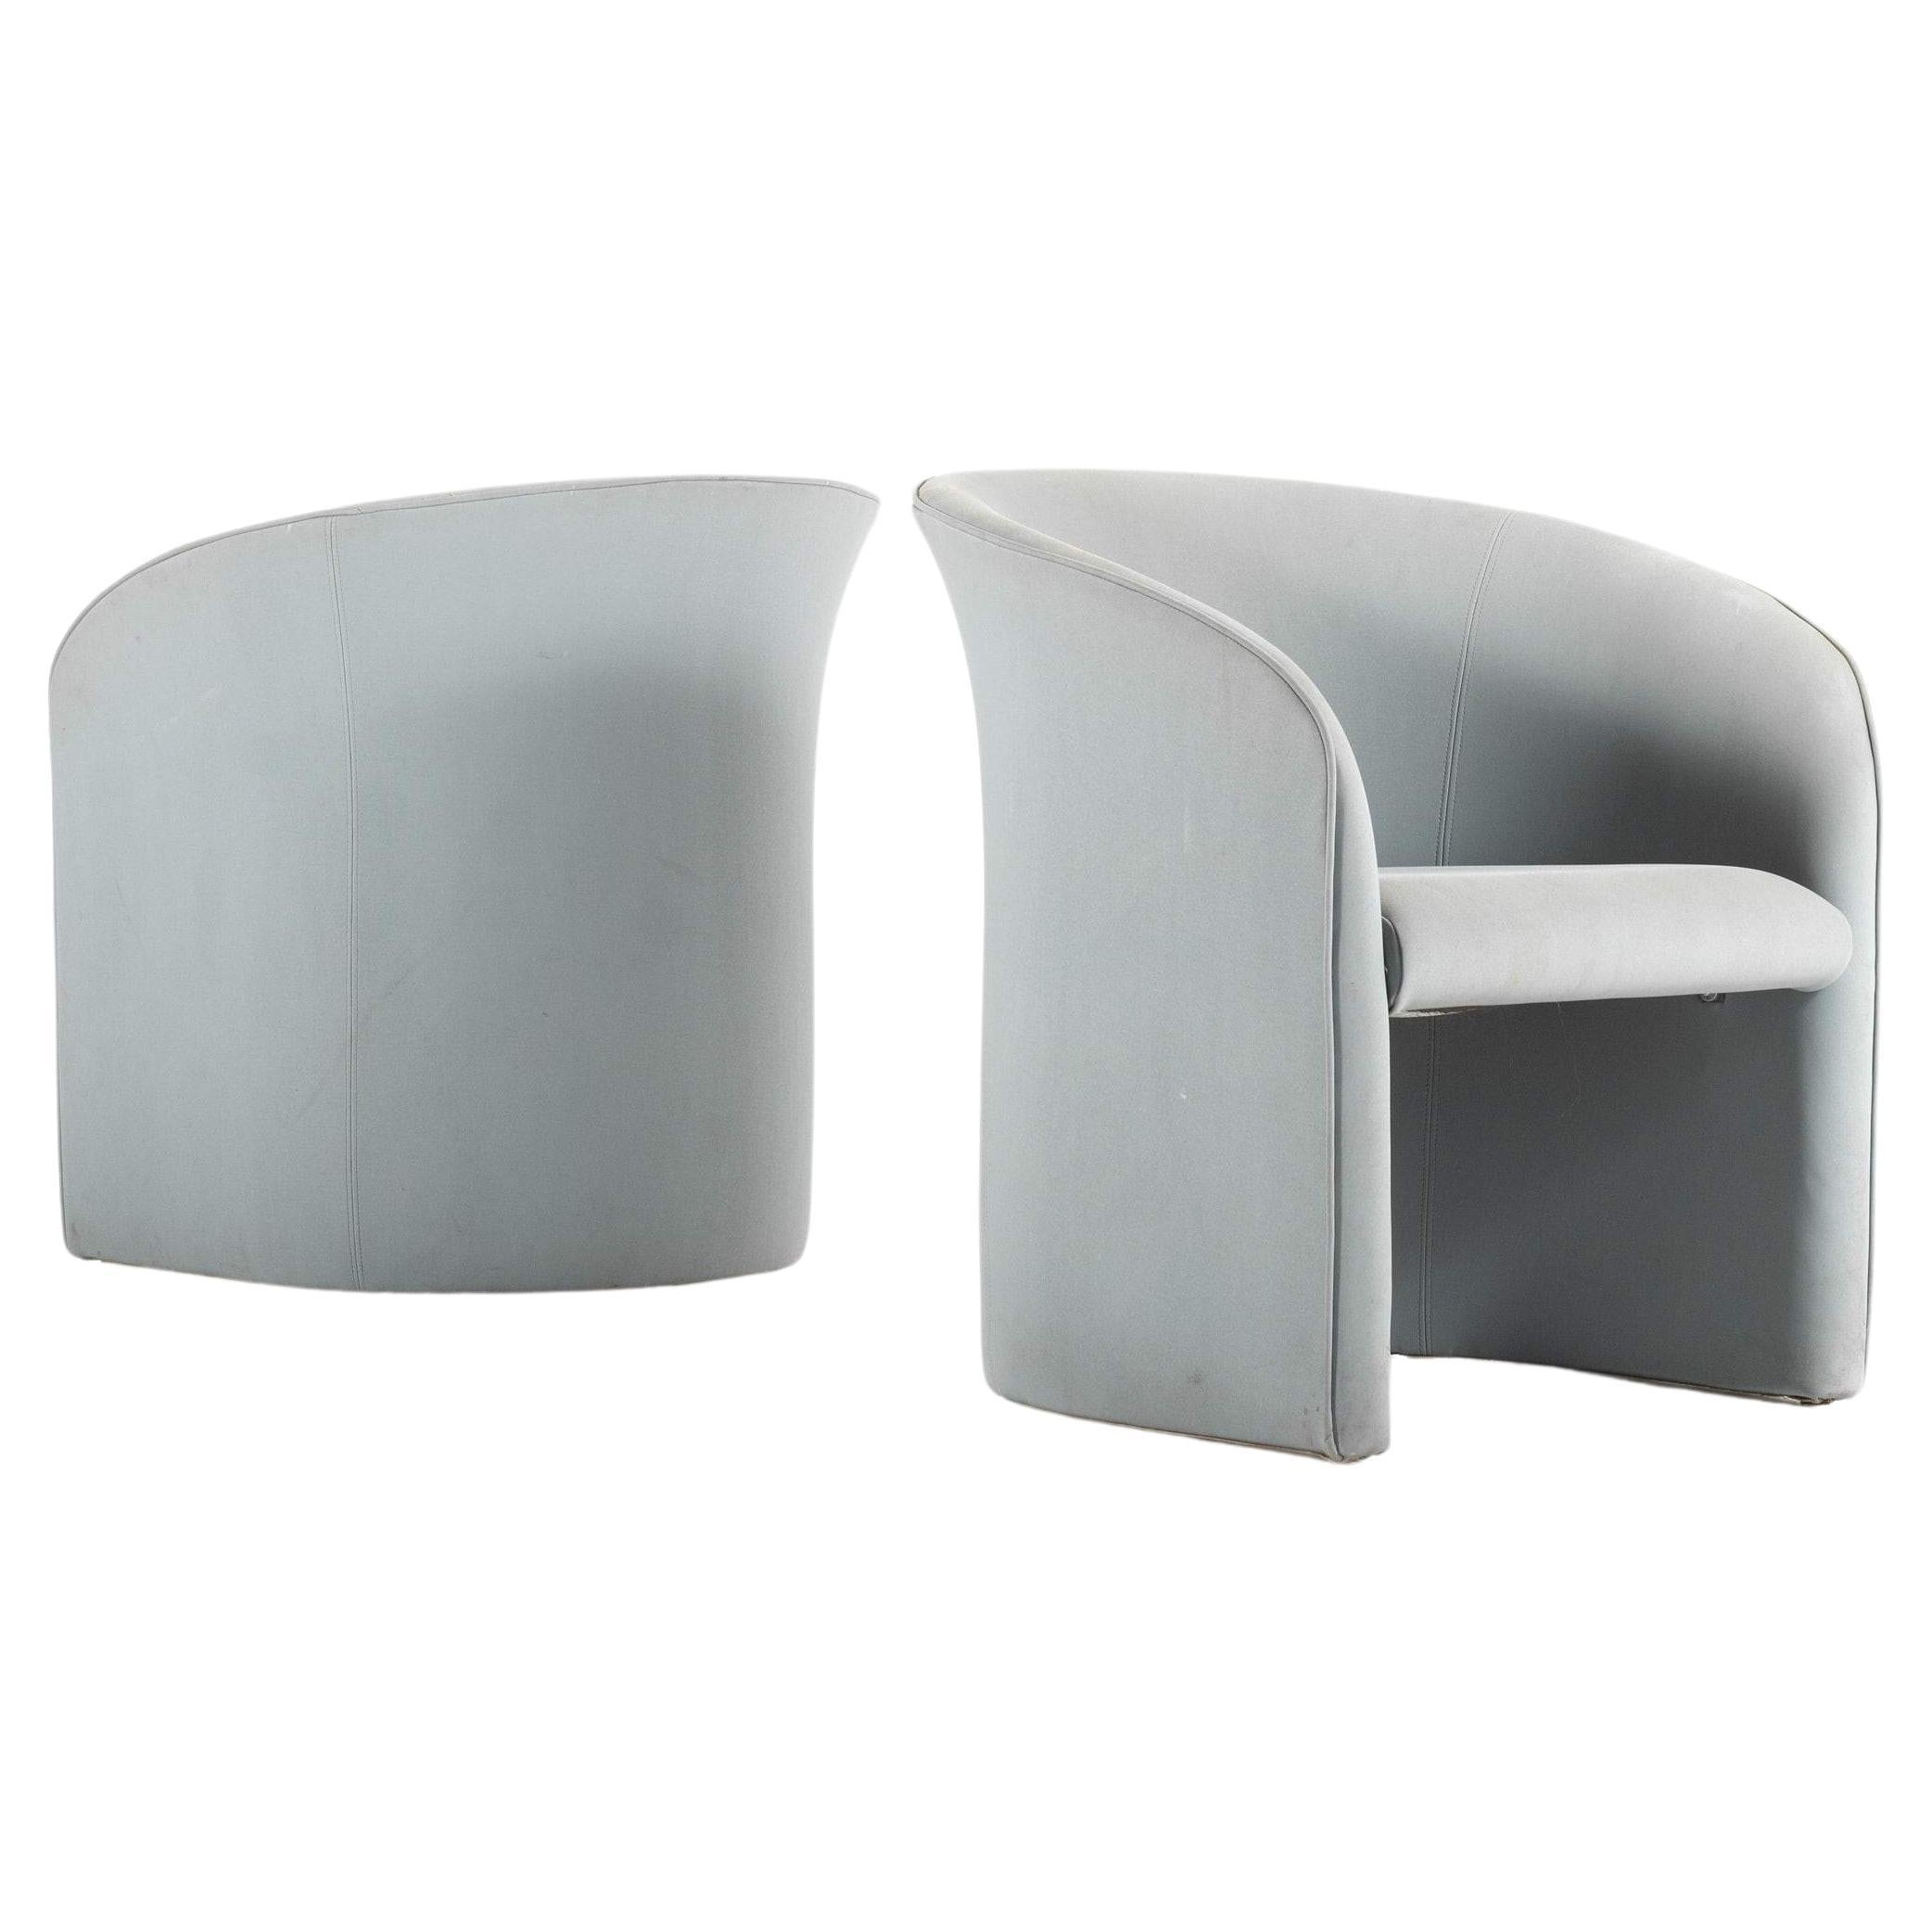 Set of Two (2) Grey Barrel Chairs in the Manner of Milo Baughman, USA, c. 1980's For Sale